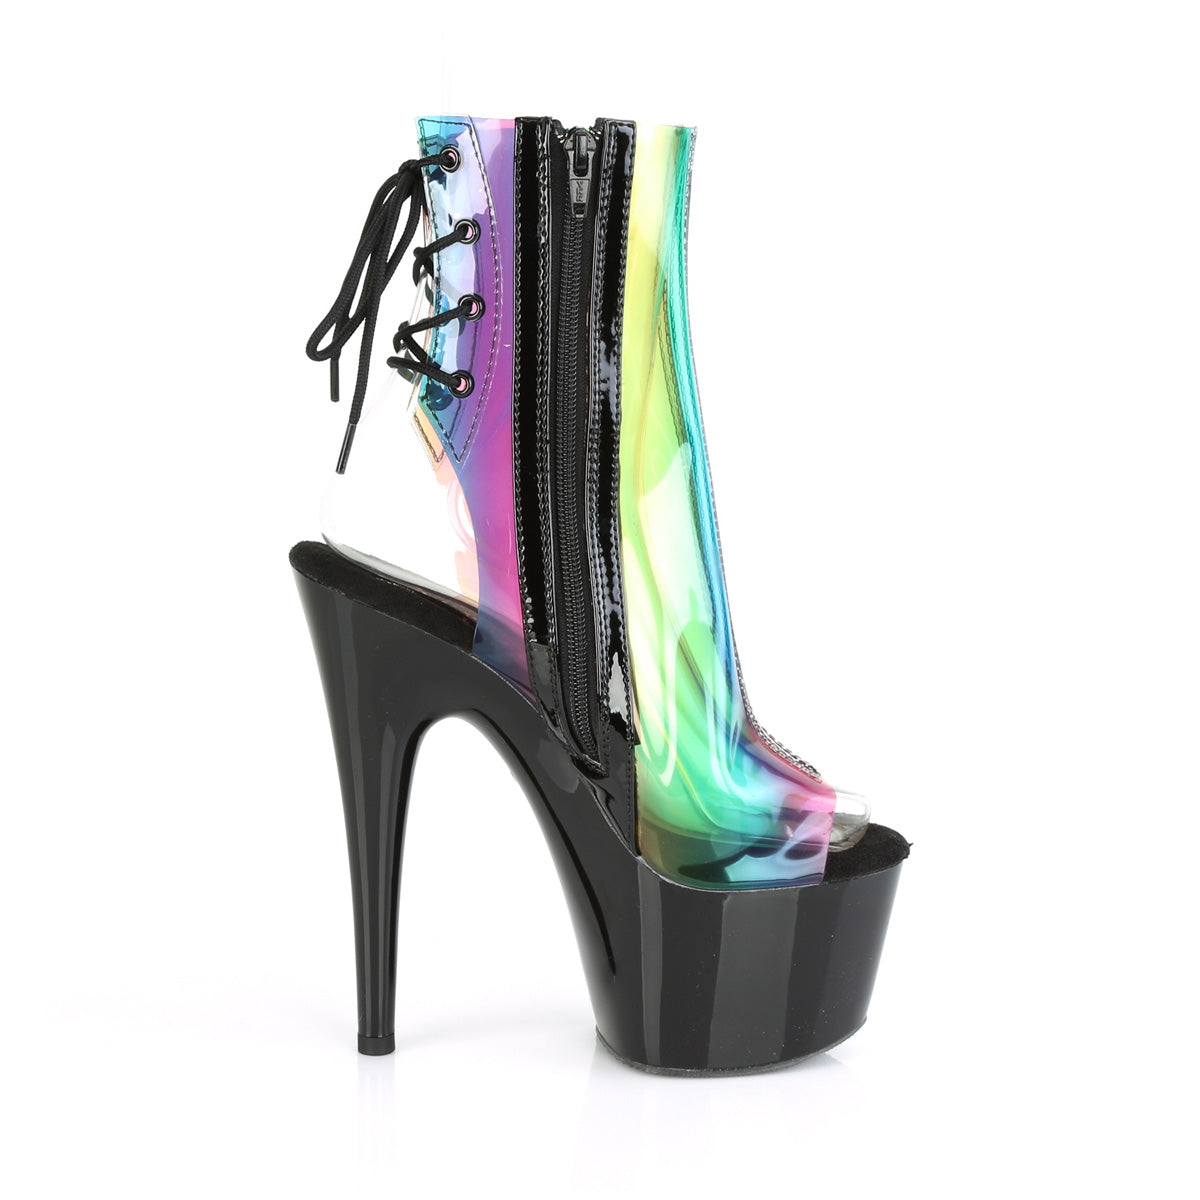 ADORE-1018C-RB Pleaser 7" Heel Rainbow Strippers Ankle Boots-Pleaser- Sexy Shoes Fetish Heels